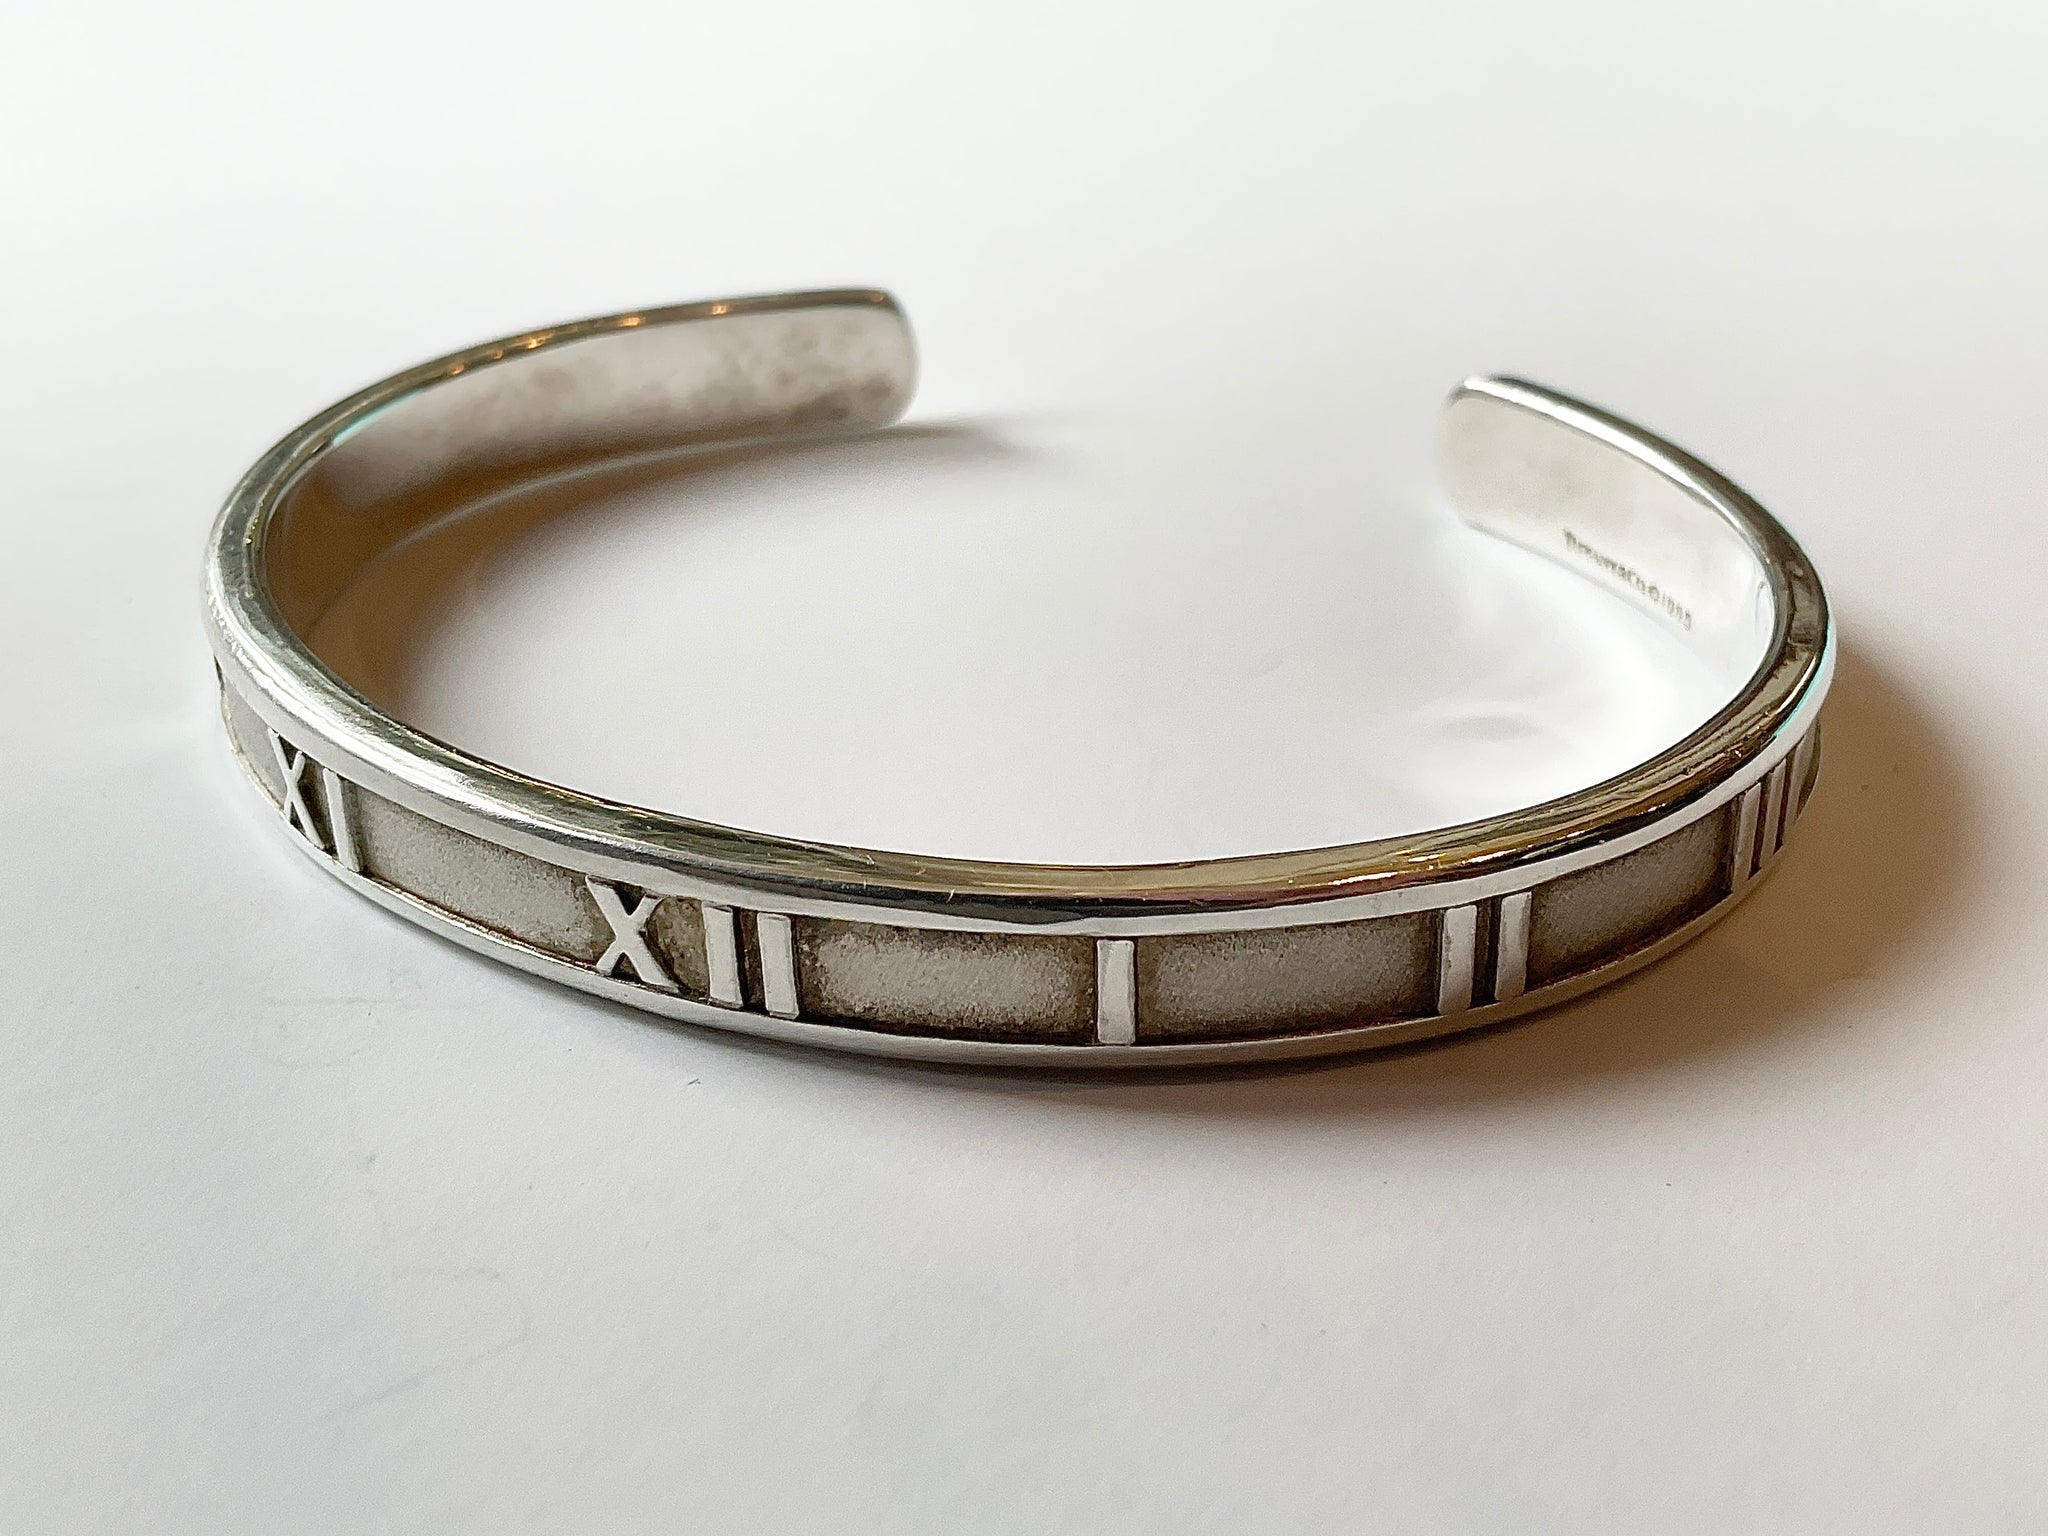 Tiffany & Co. Atlas Collection Roman Numeral Bangle Sterling Silver